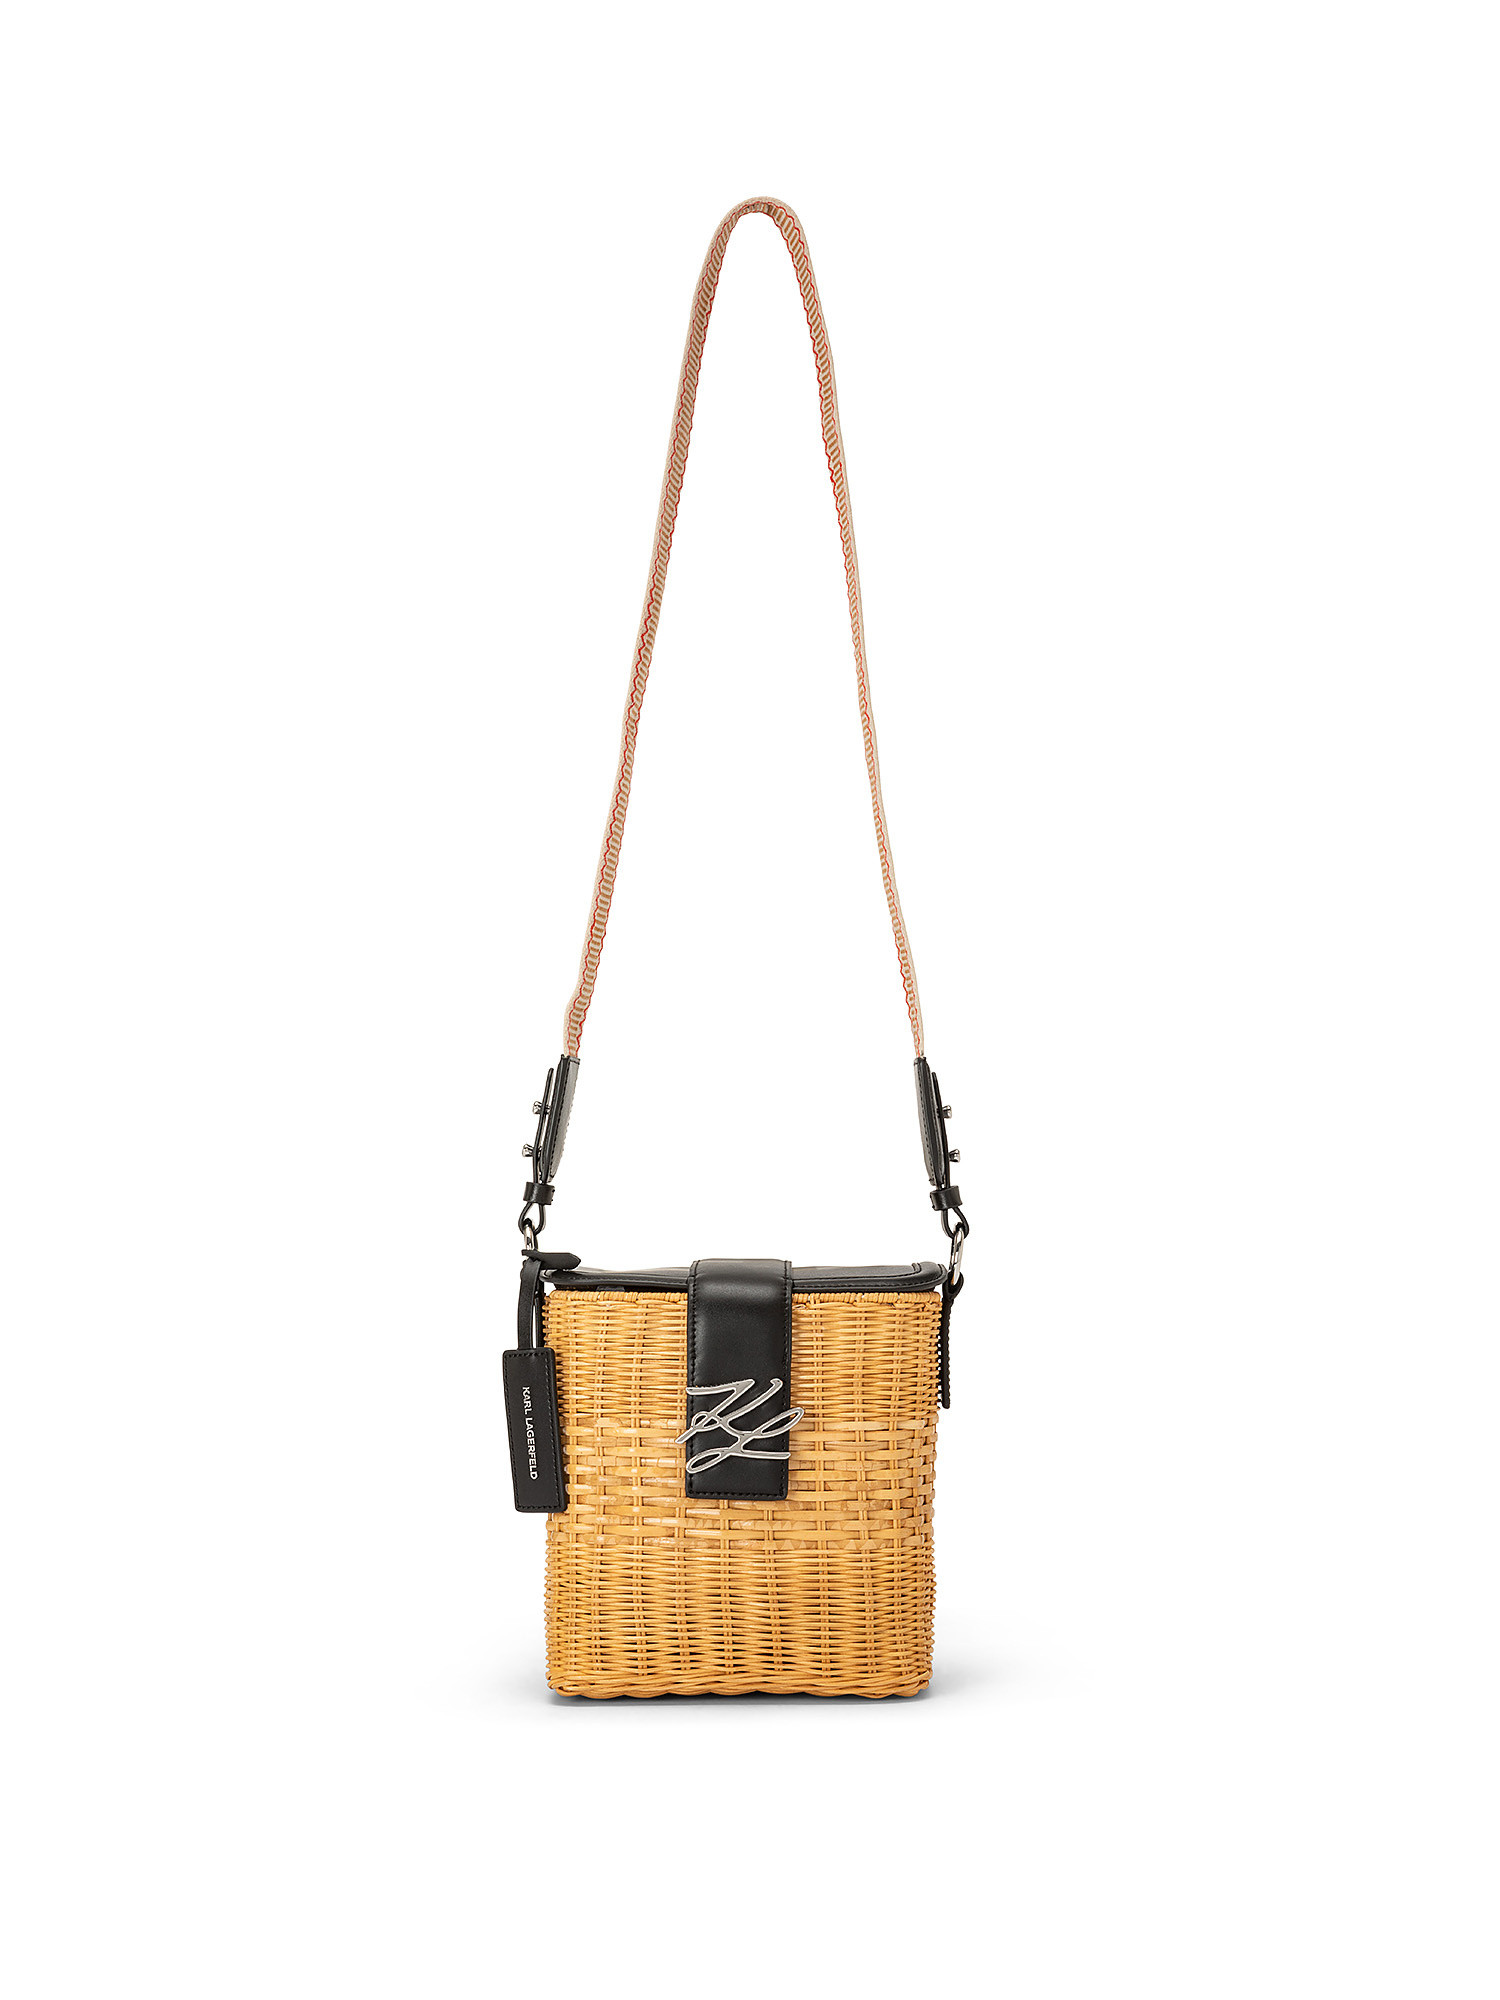 Autograph wicker crossbody, Black, large image number 0